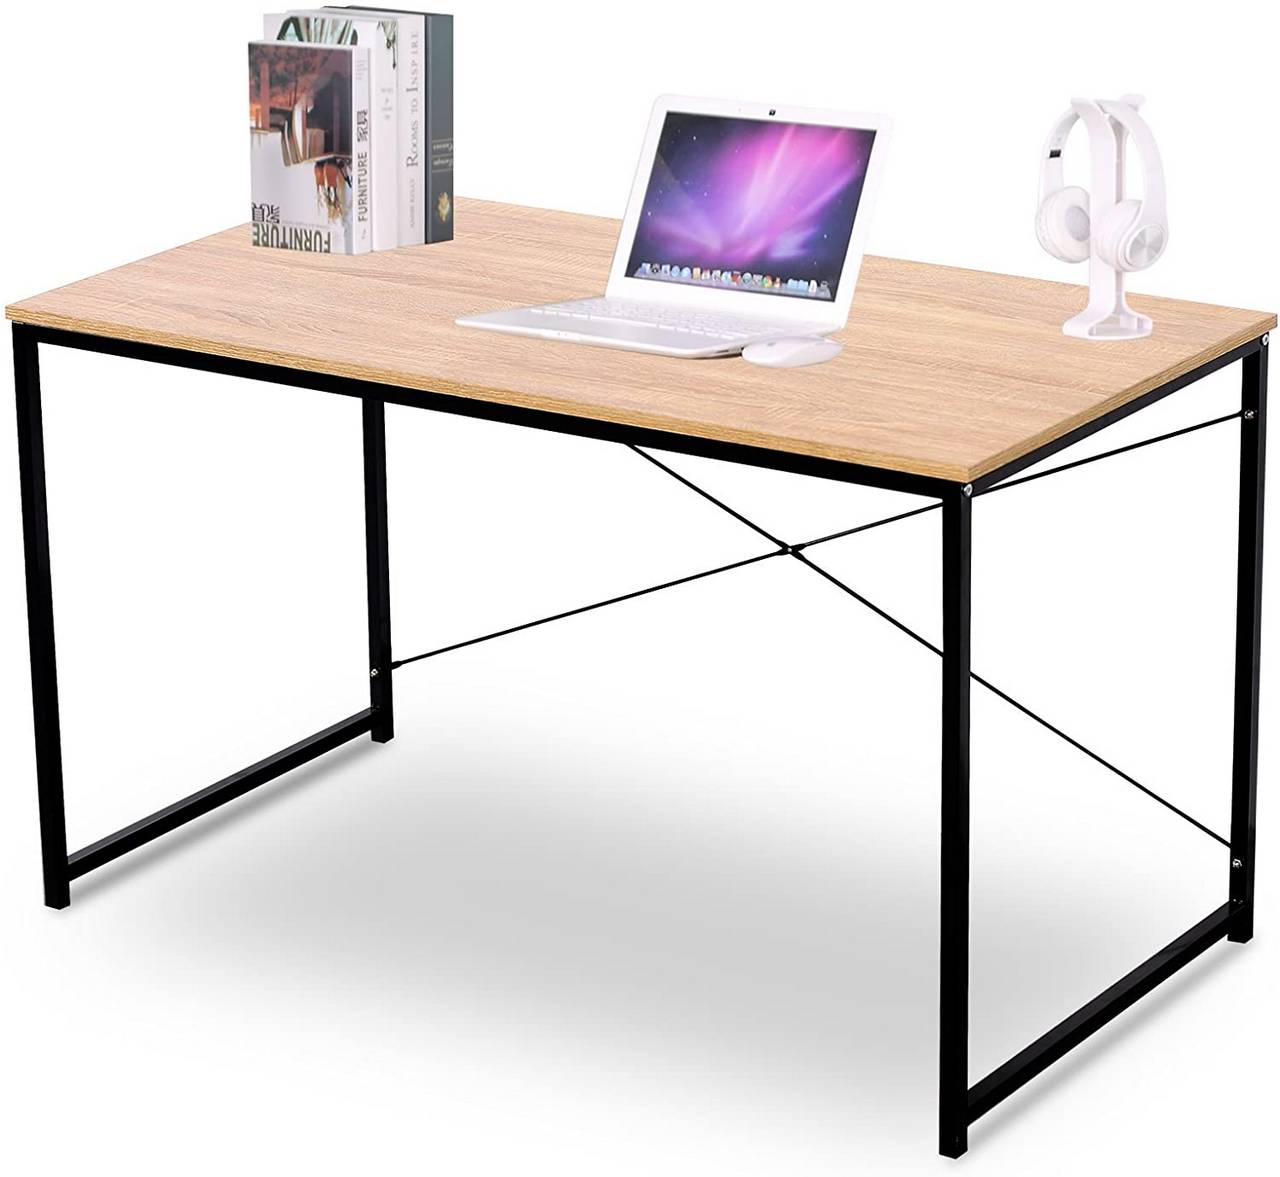 Classic Office Table With A Modern Design Woltu Eu